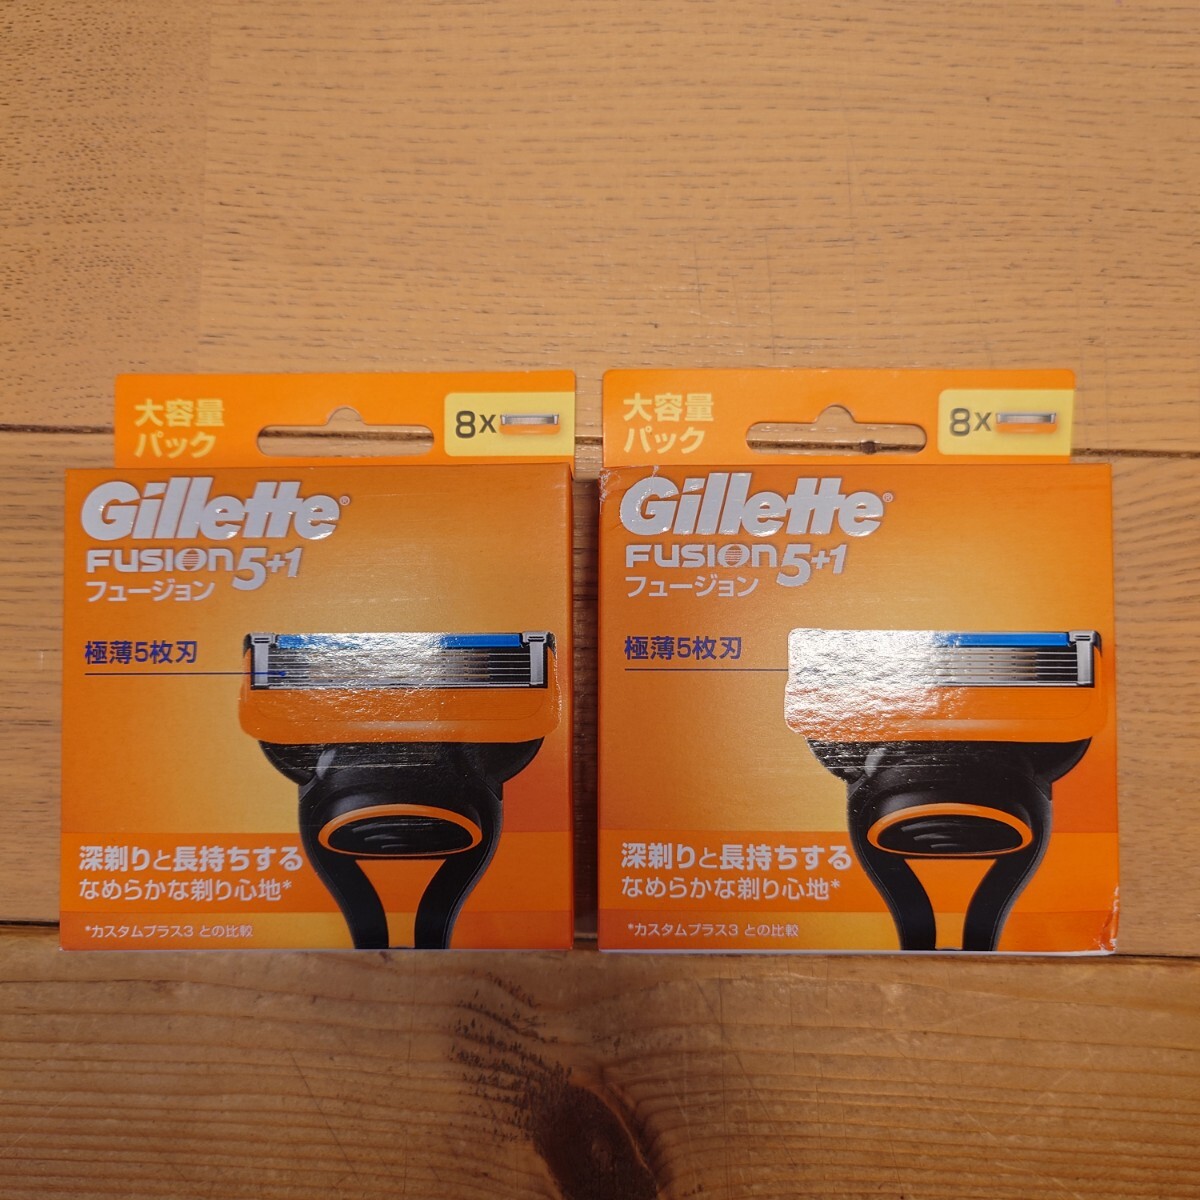 ji let * Fusion * electric type * razor total 48 piece entering * same day shipping * high capacity pack *Gillette